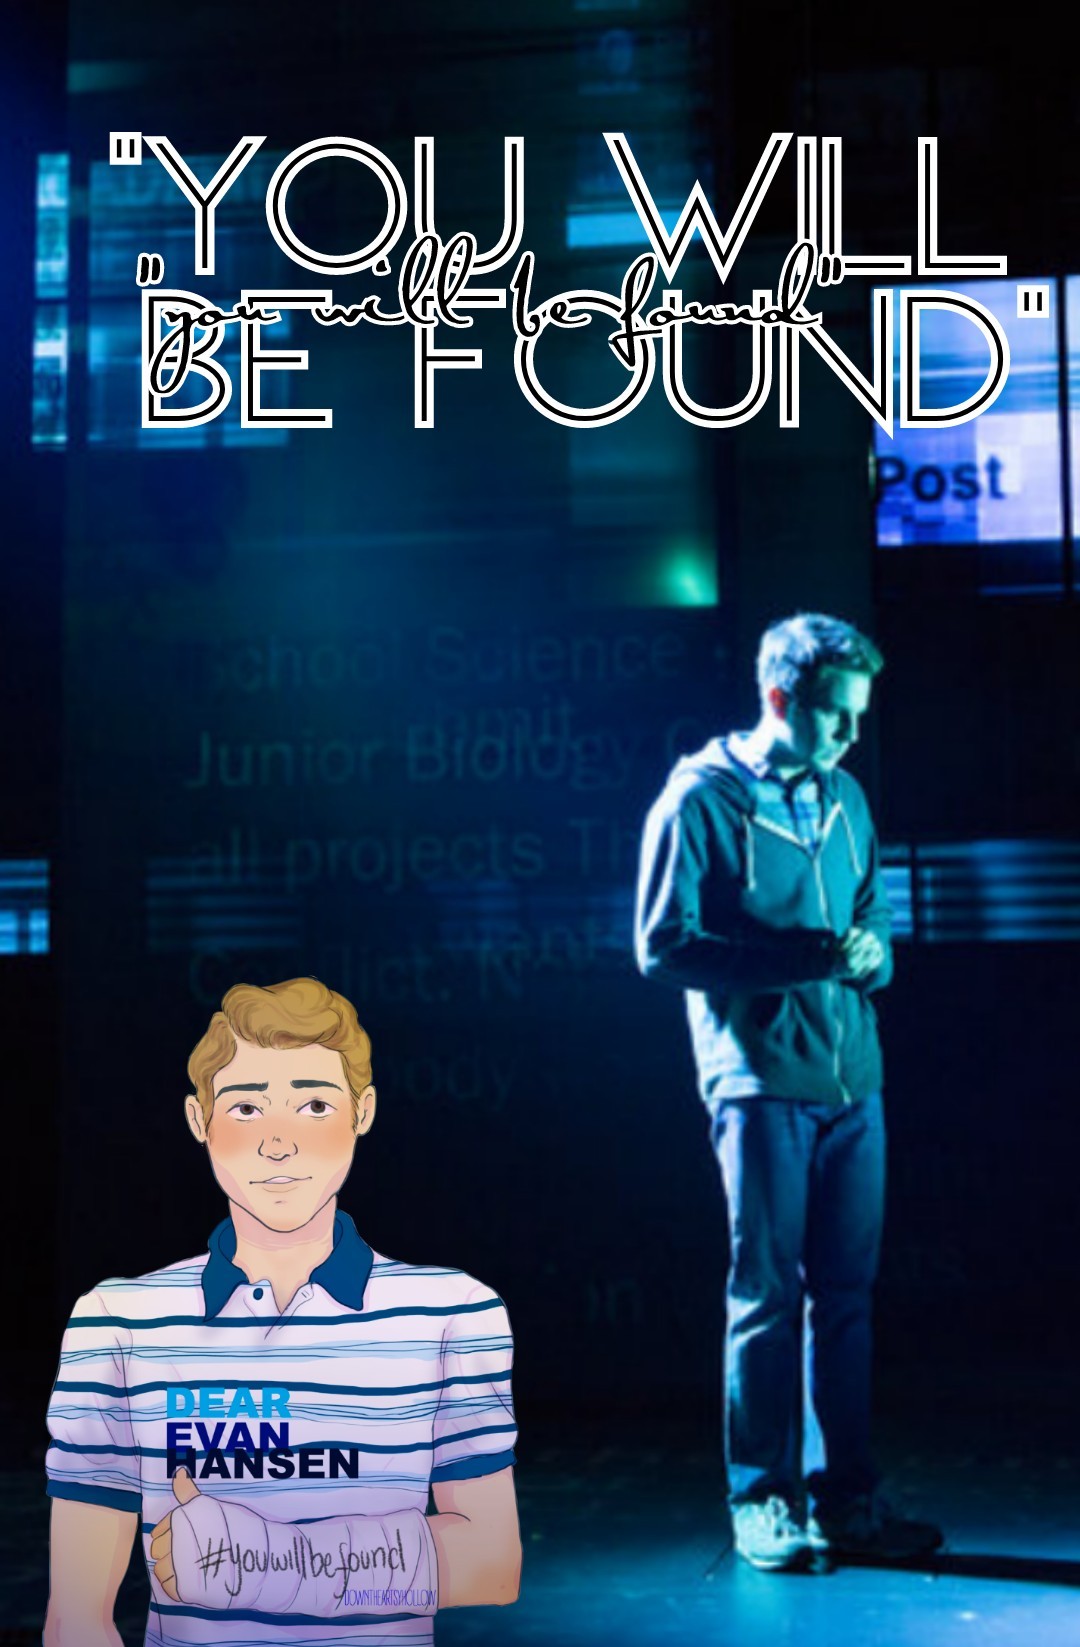 "you will be found"